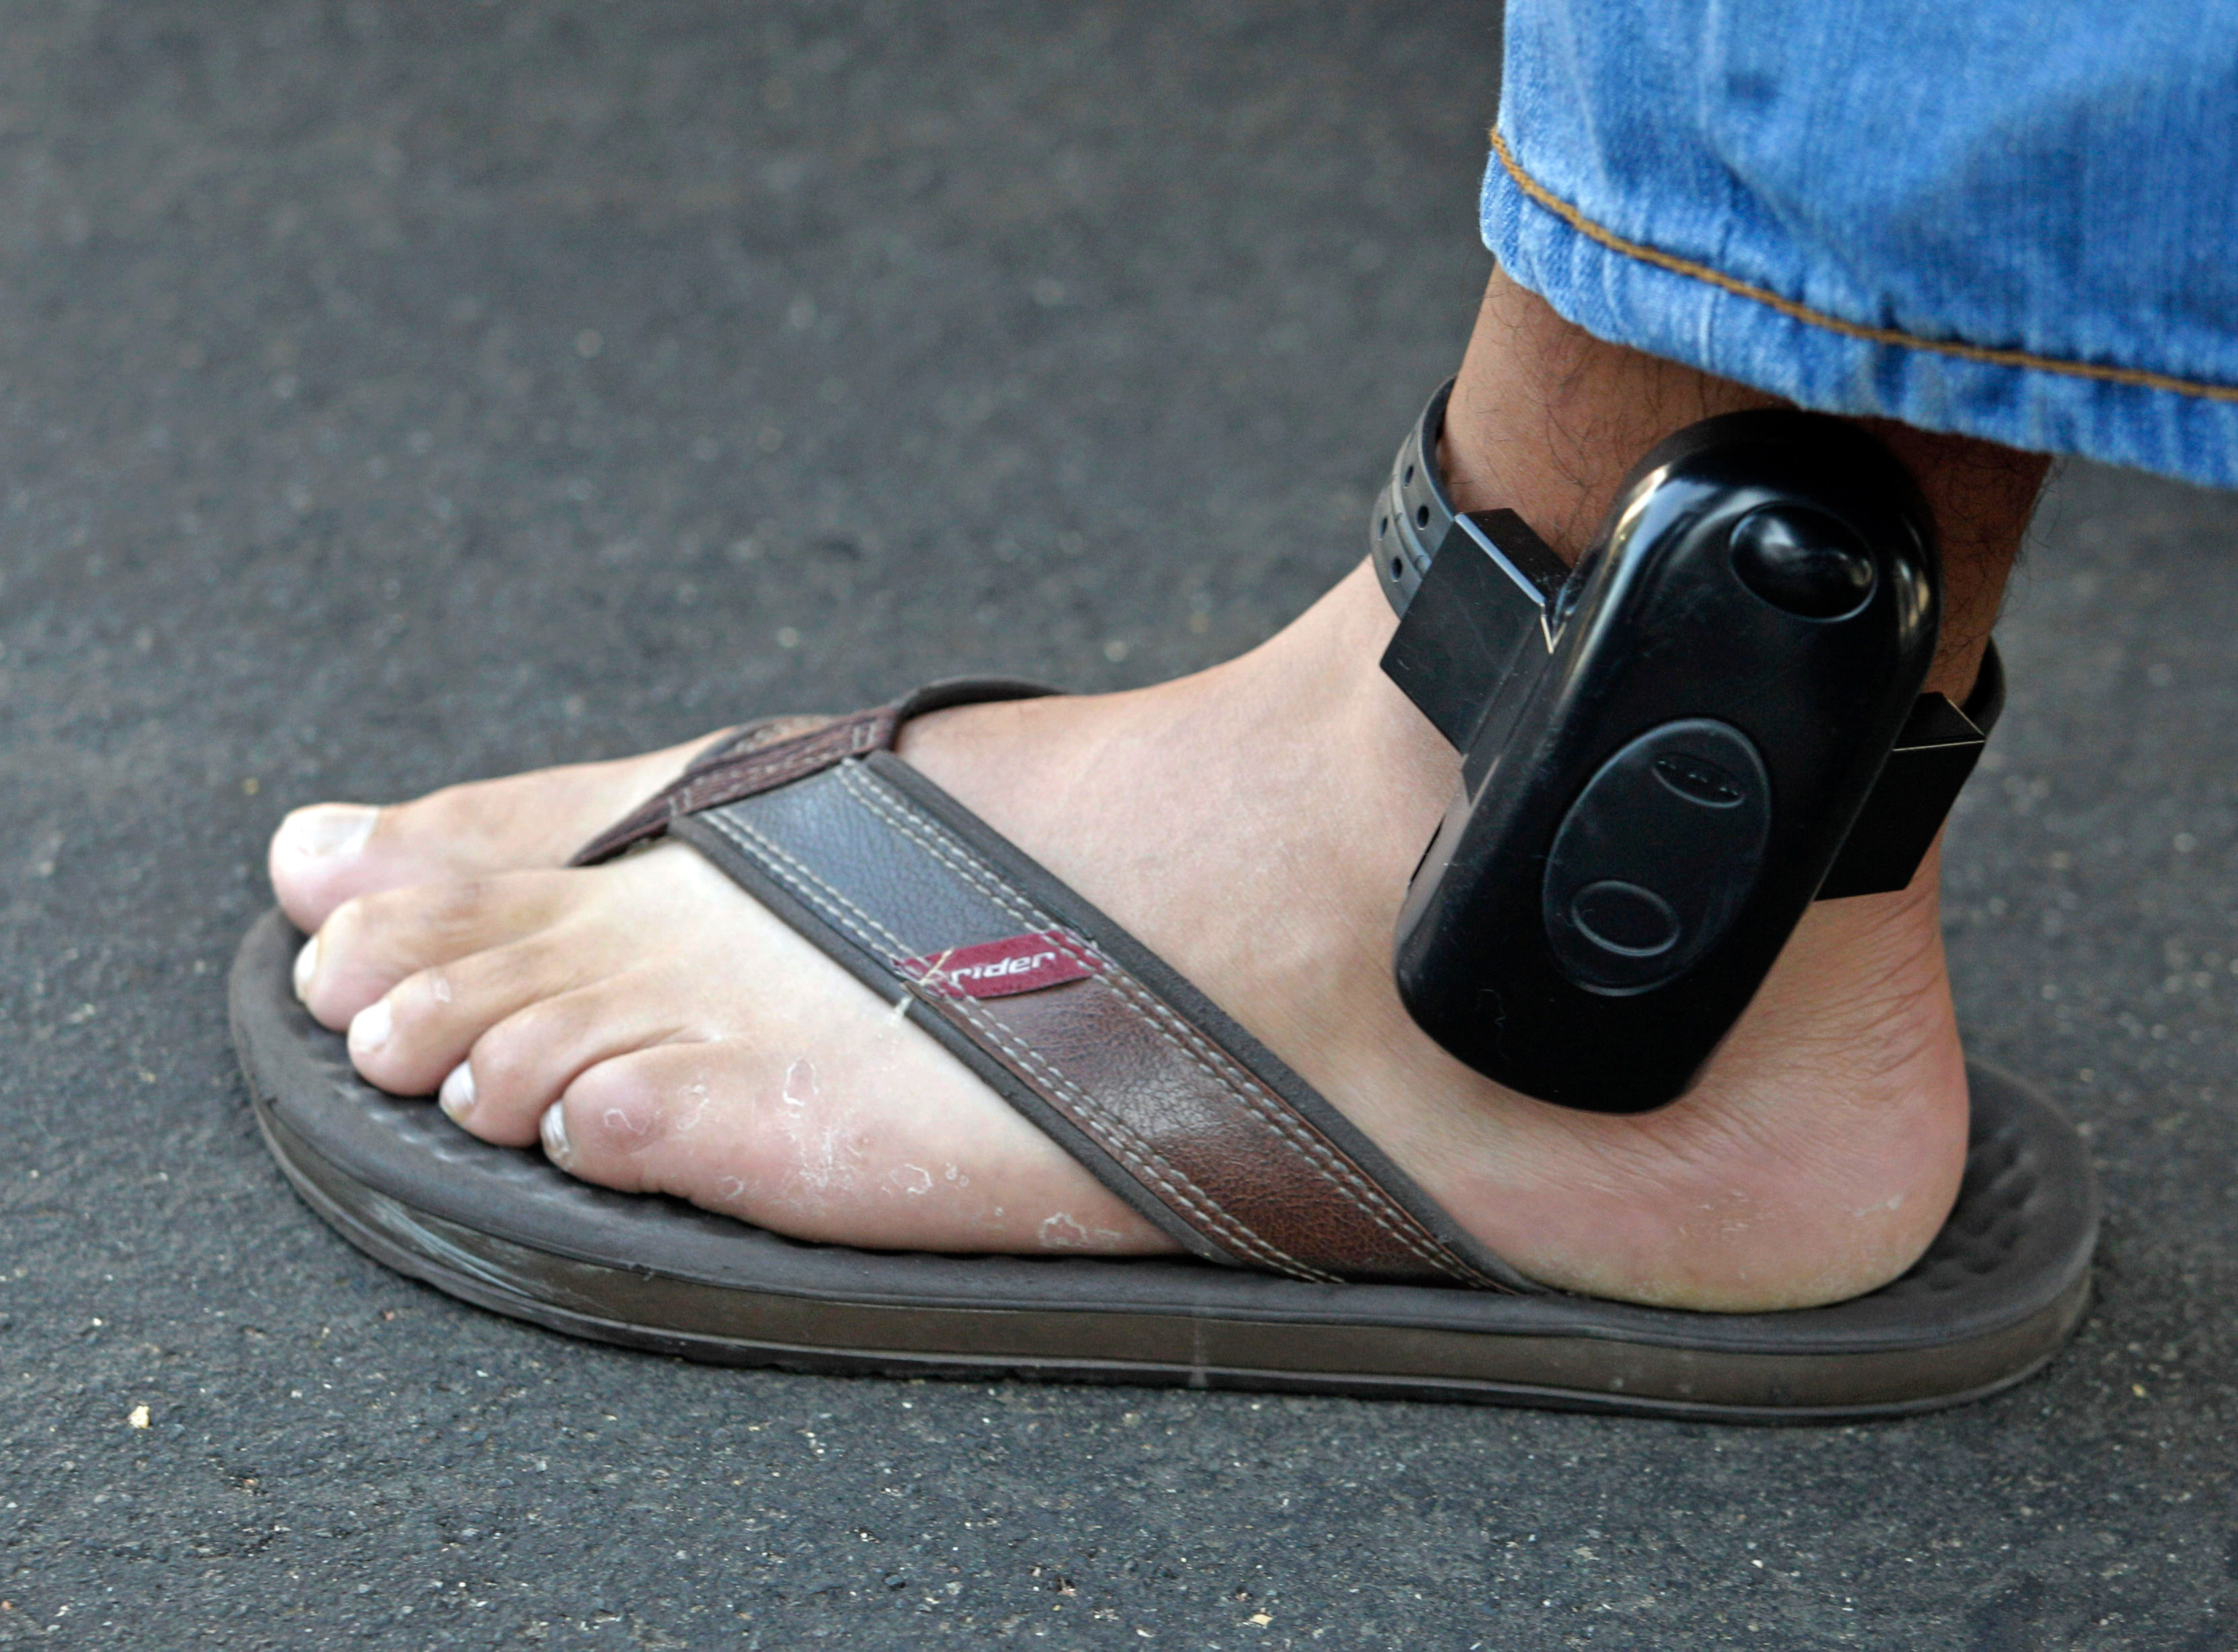 This Alabama county fastens ankle monitors on hundreds who aren't convicted  of crimes - al.com